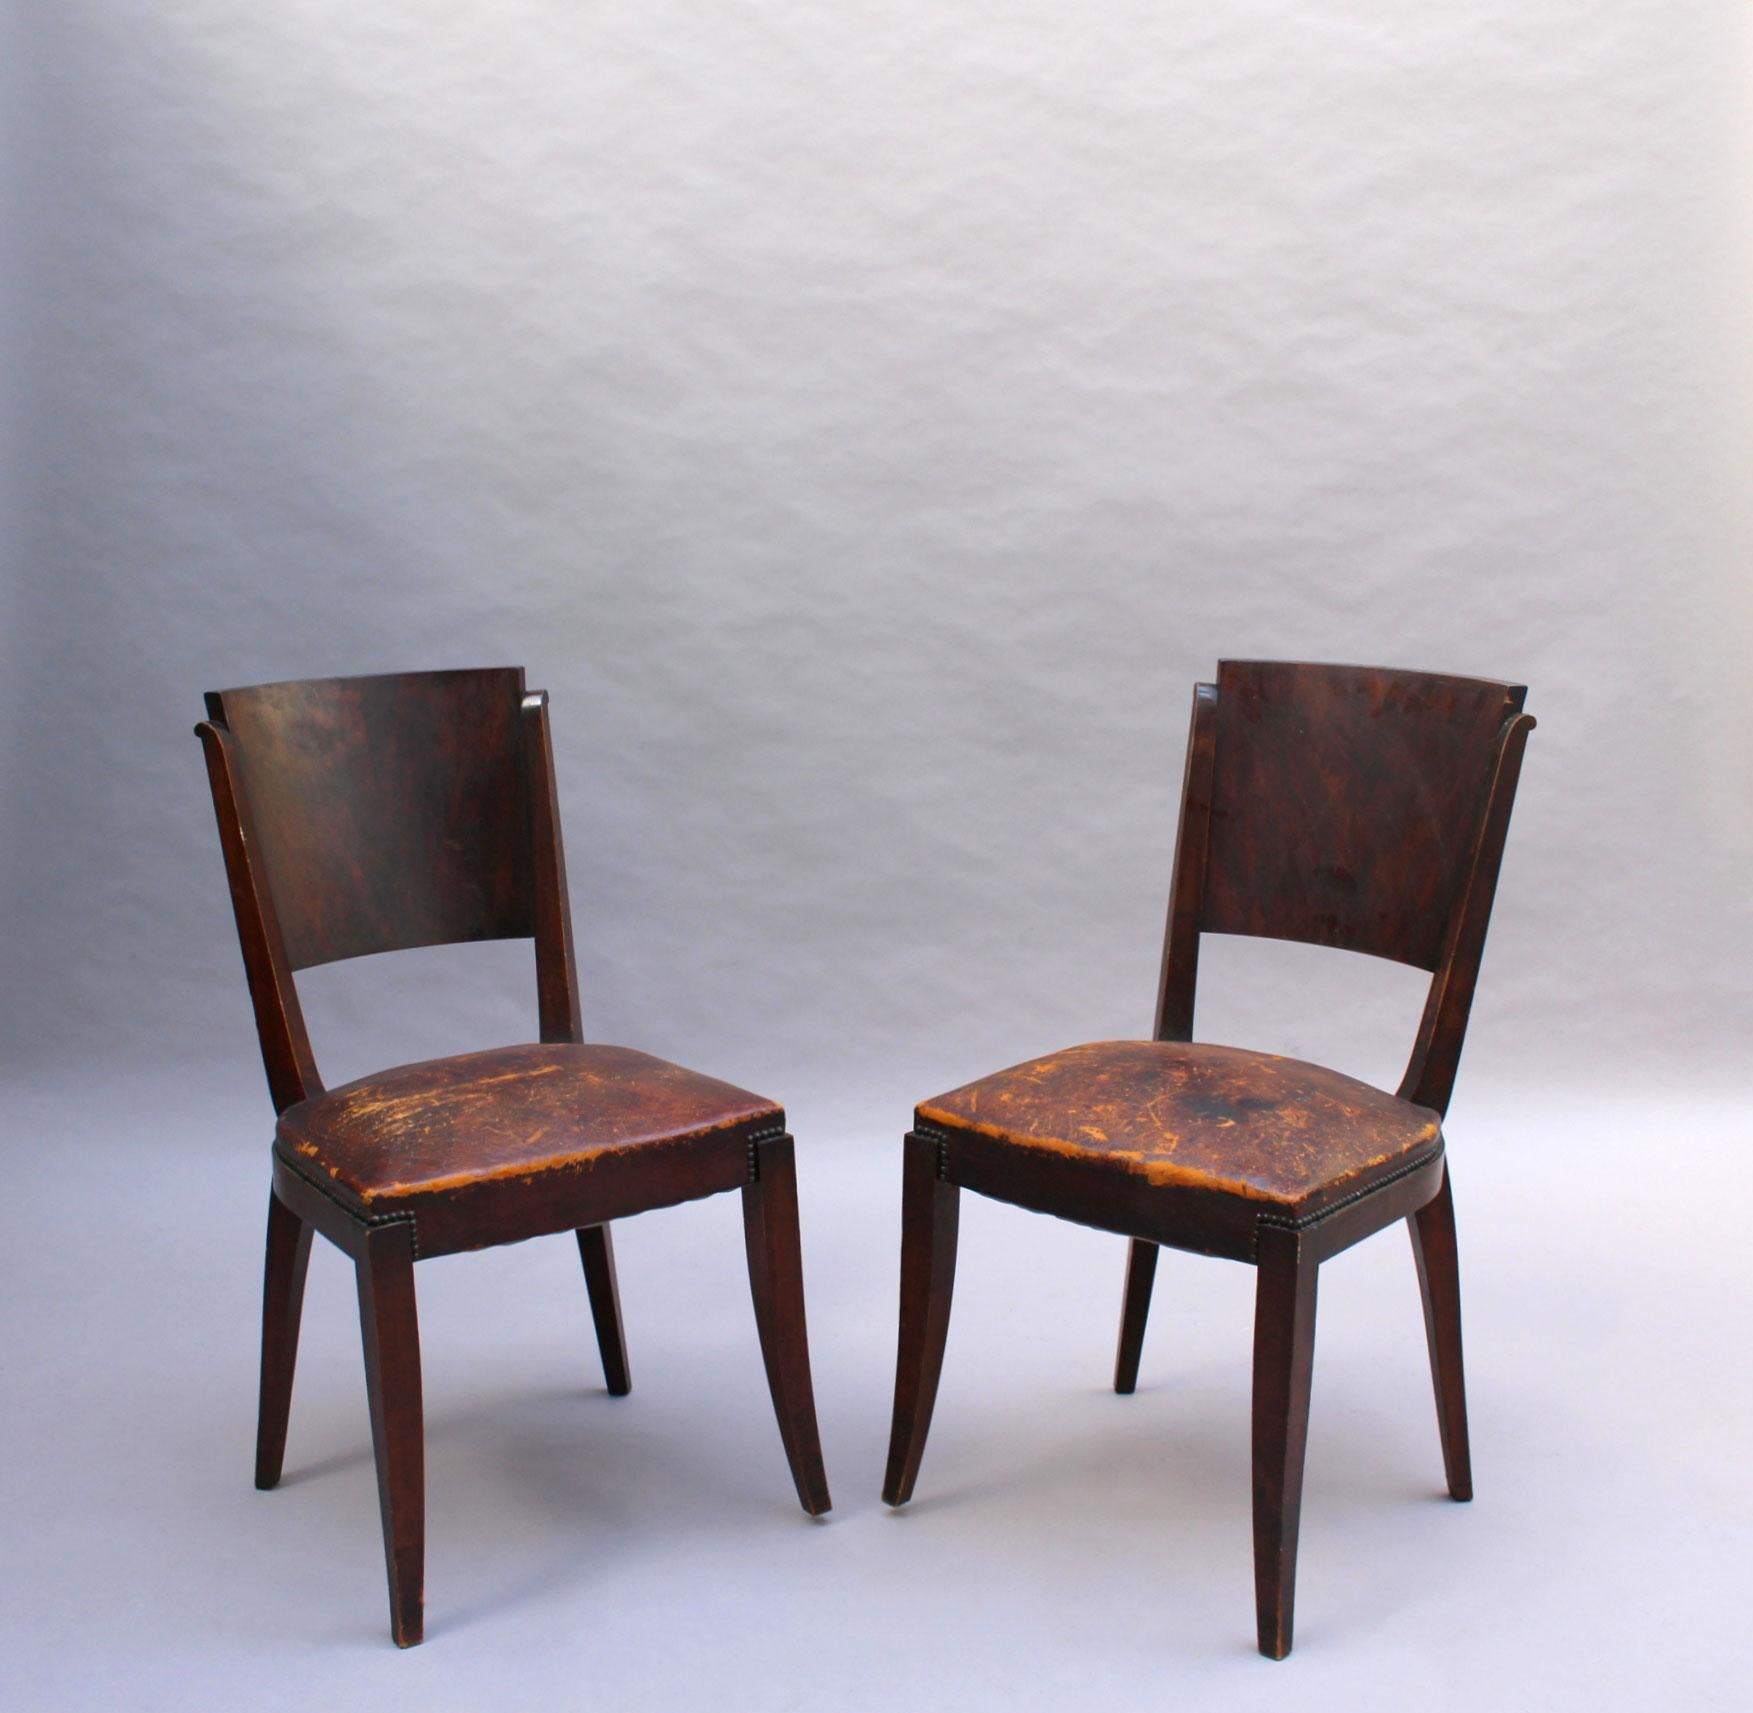 Mid-20th Century Set of 6 French Art Deco Palissander and Stained Wood Dining Chairs